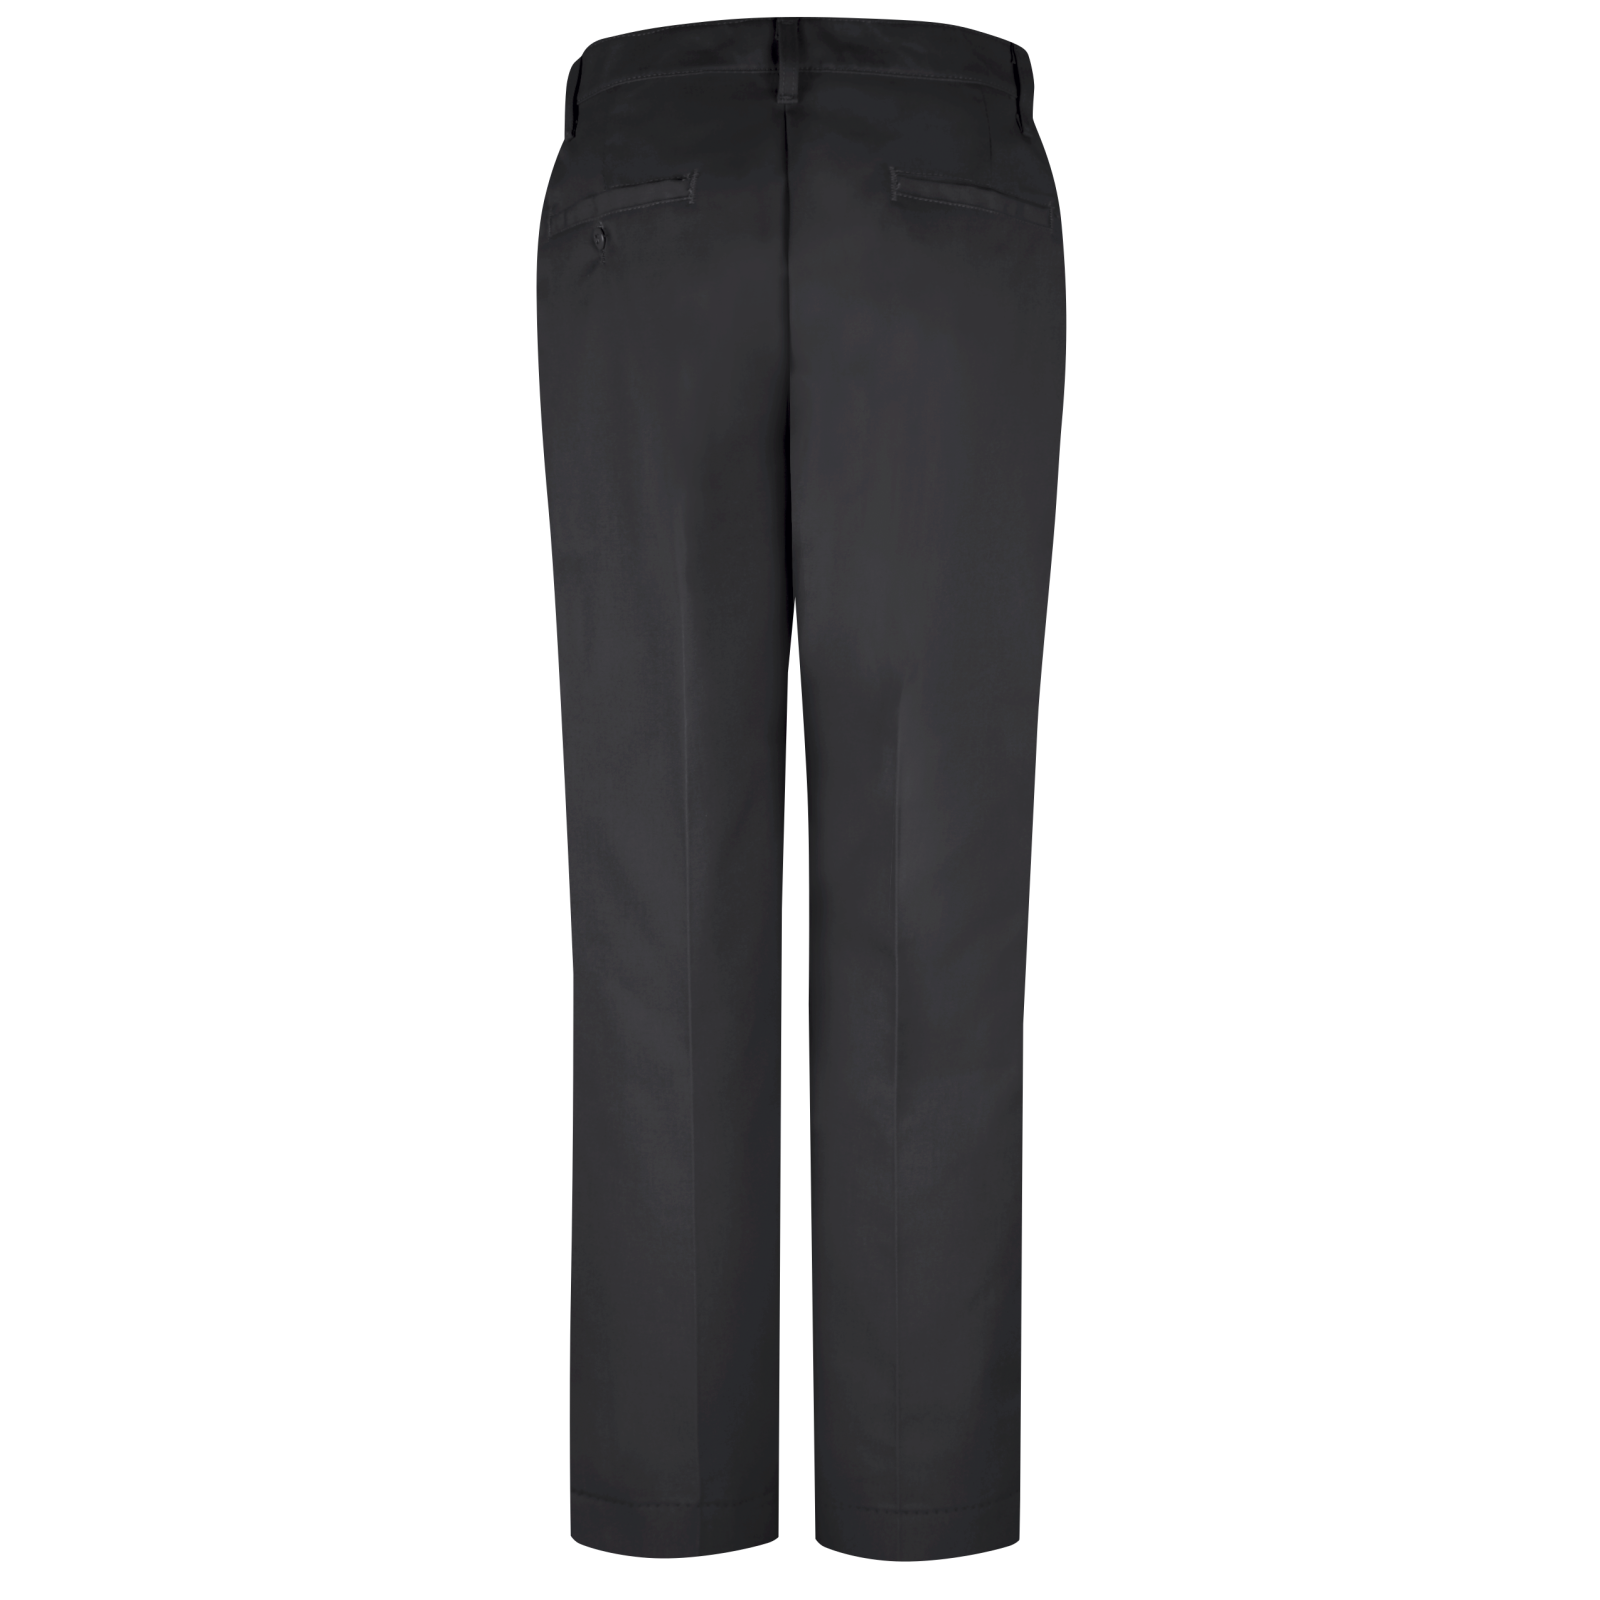 Wholesale Skinny Womens Trousers Manufacturers & Suppliers - LANXIN APPAREL